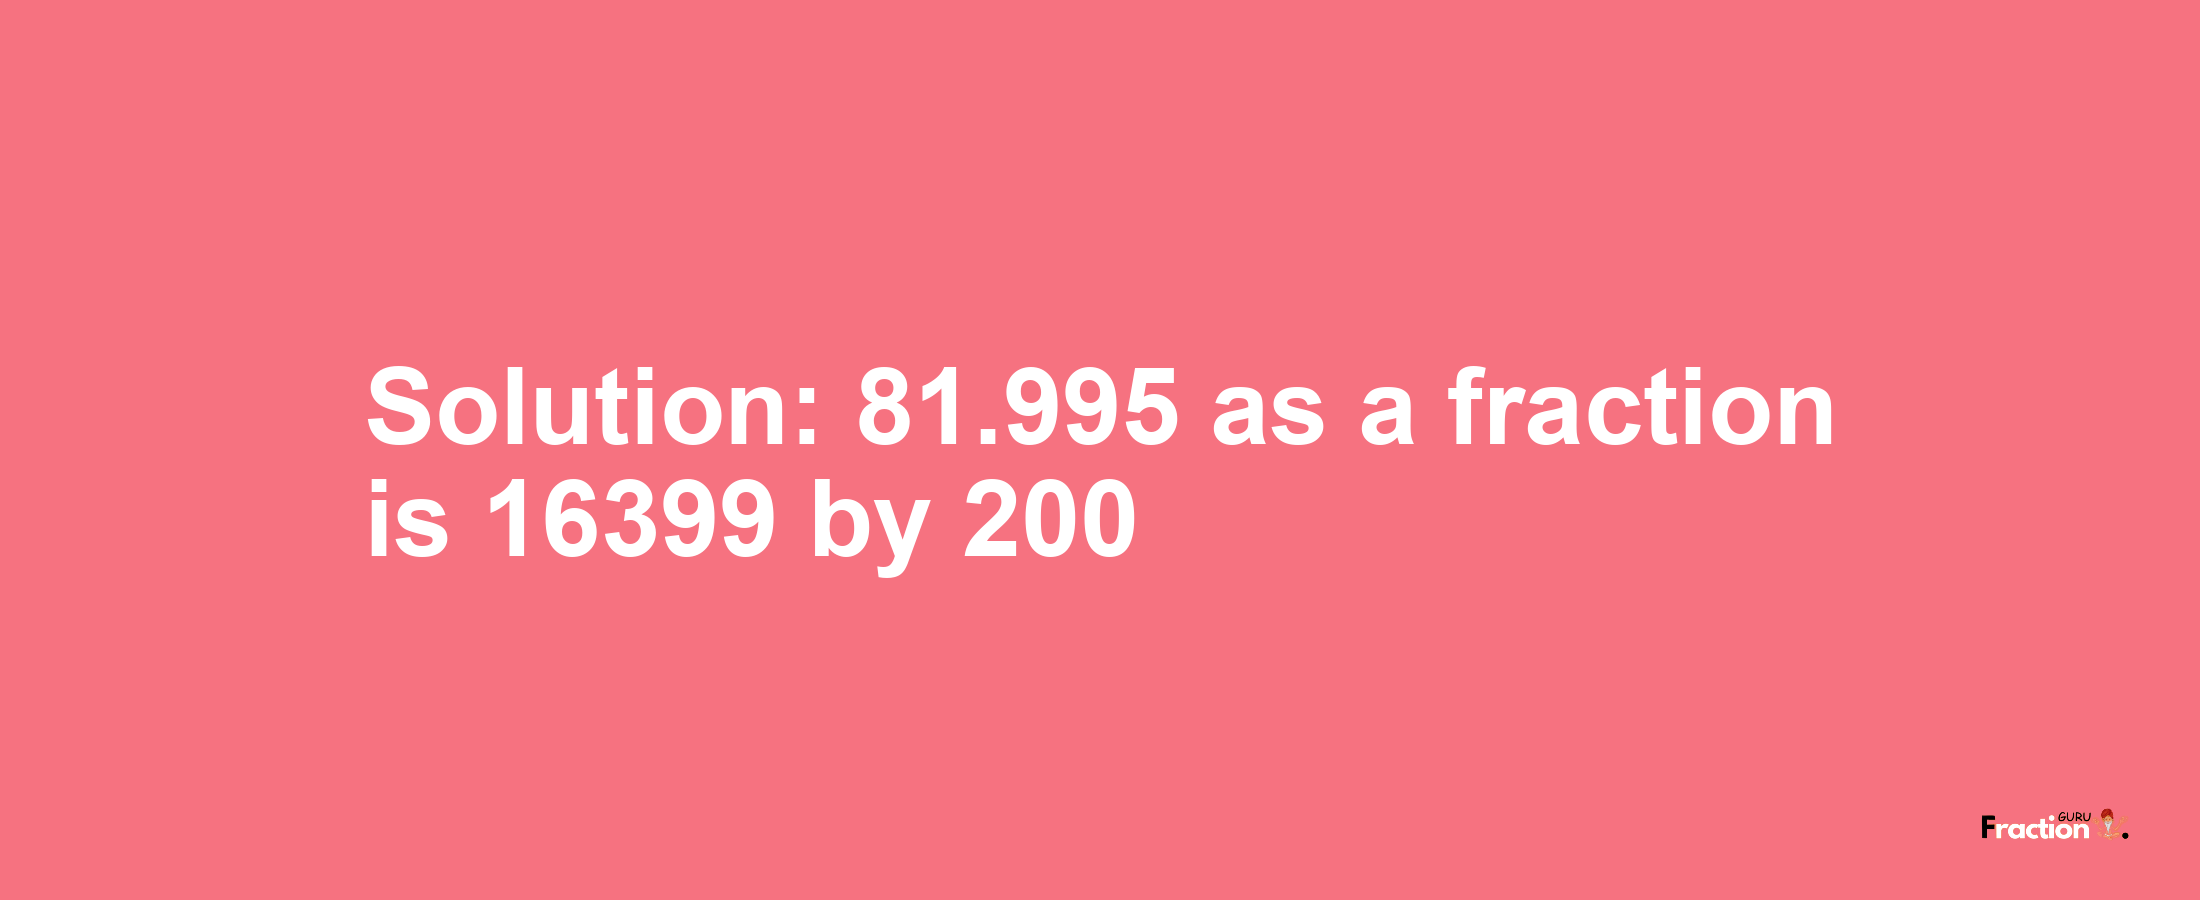 Solution:81.995 as a fraction is 16399/200